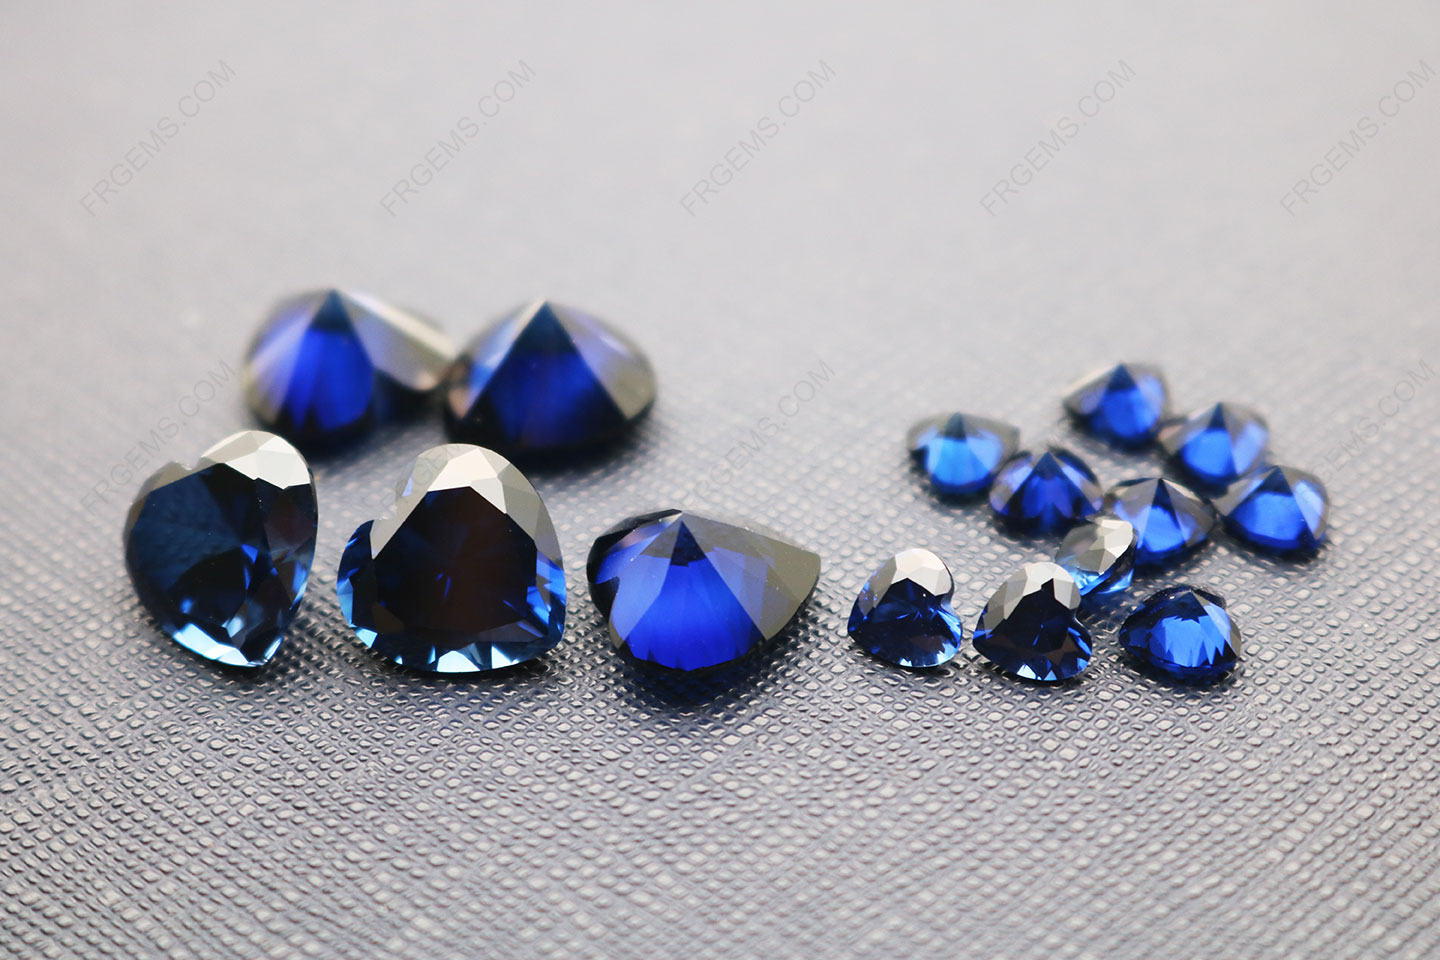 Loose Synthetic Corundum Blue Sapphire #34 Heart shape Faceted Cut 12x12mm vs 6x6mm stones IMG_5518